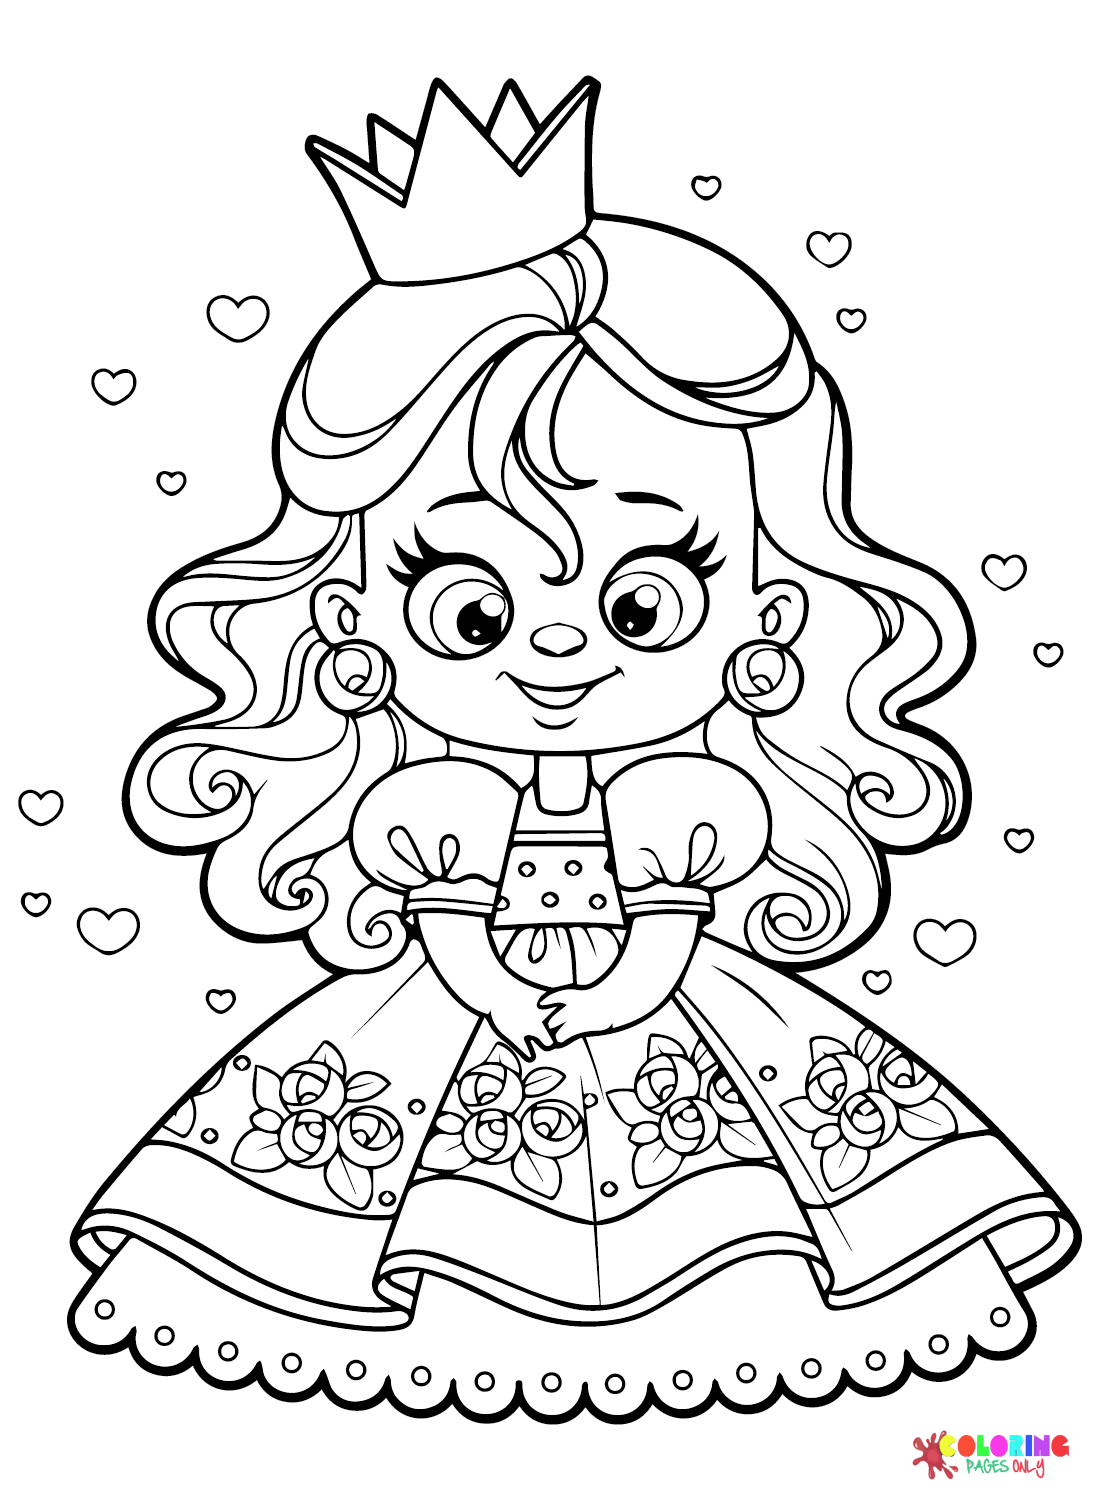 Cute Queen Coloring Page